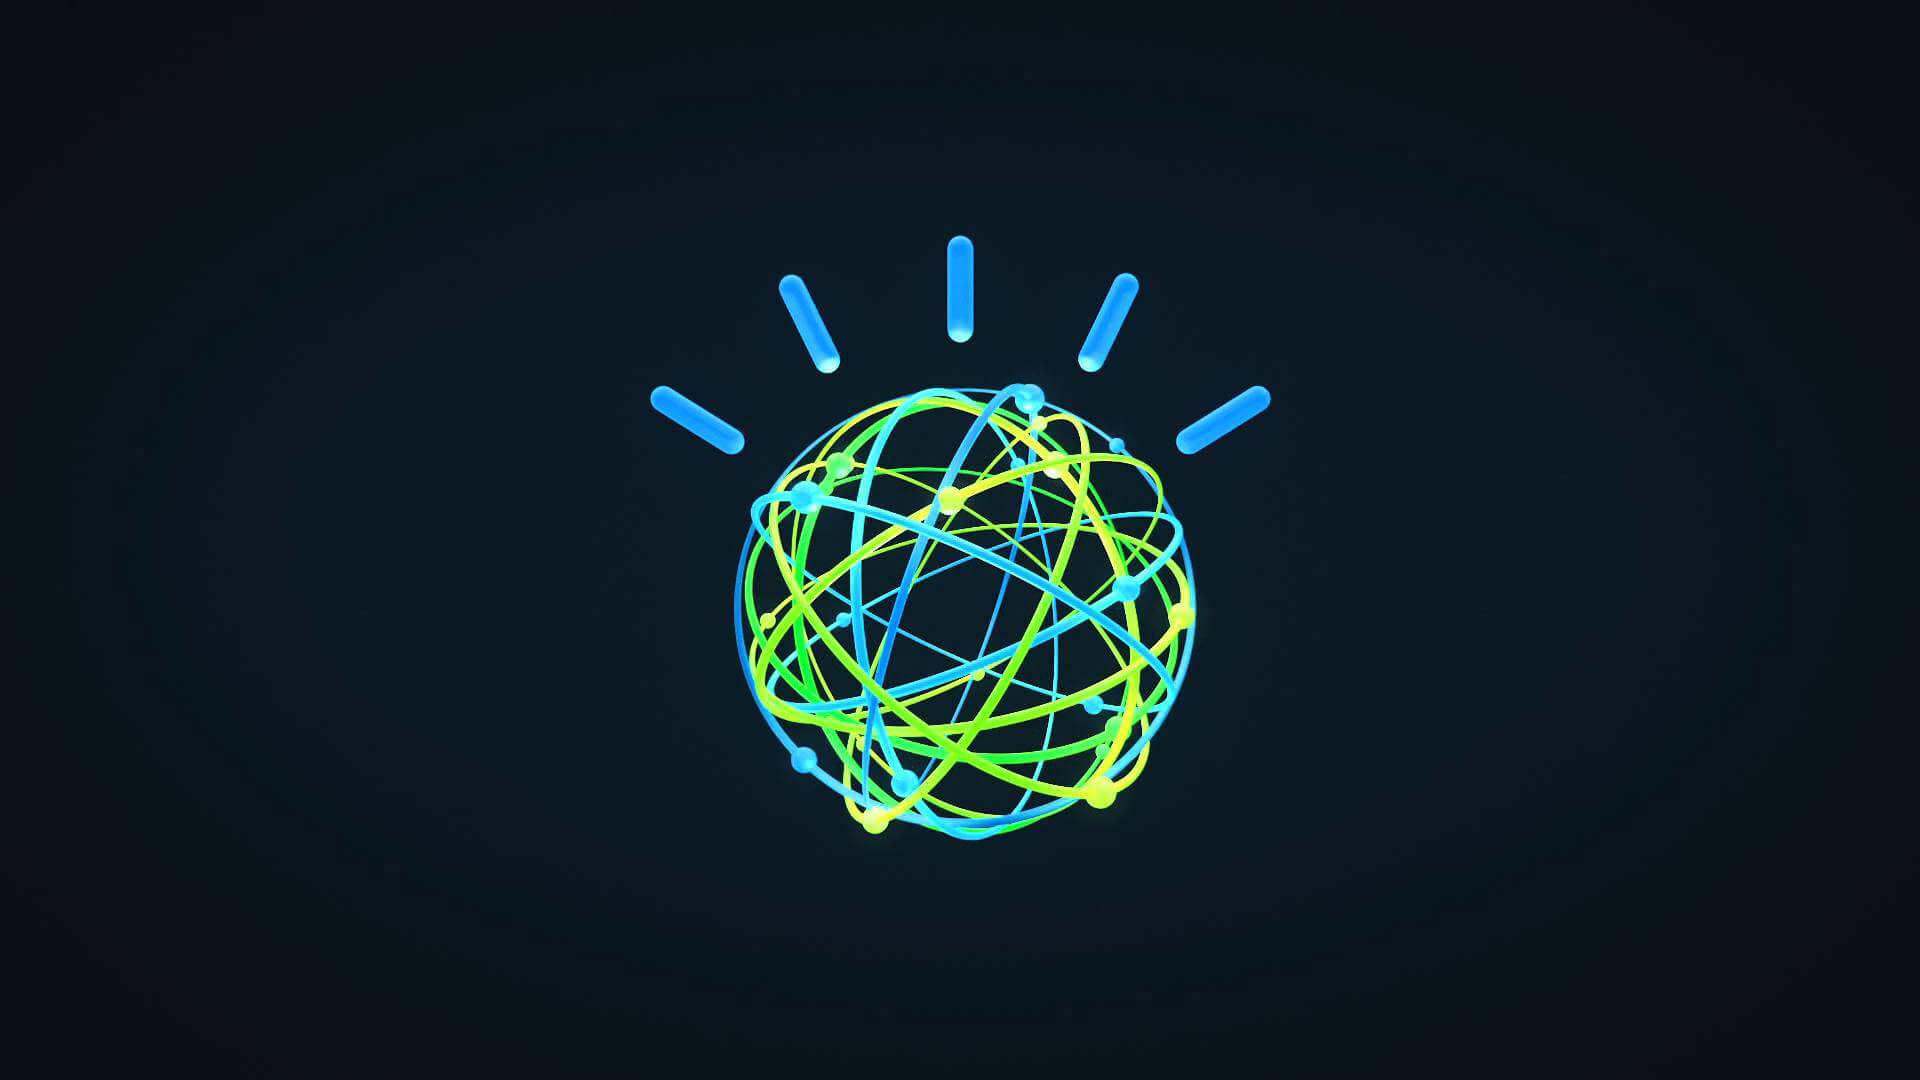 IBM's Watson Marketing spinoff launches with agile strategy